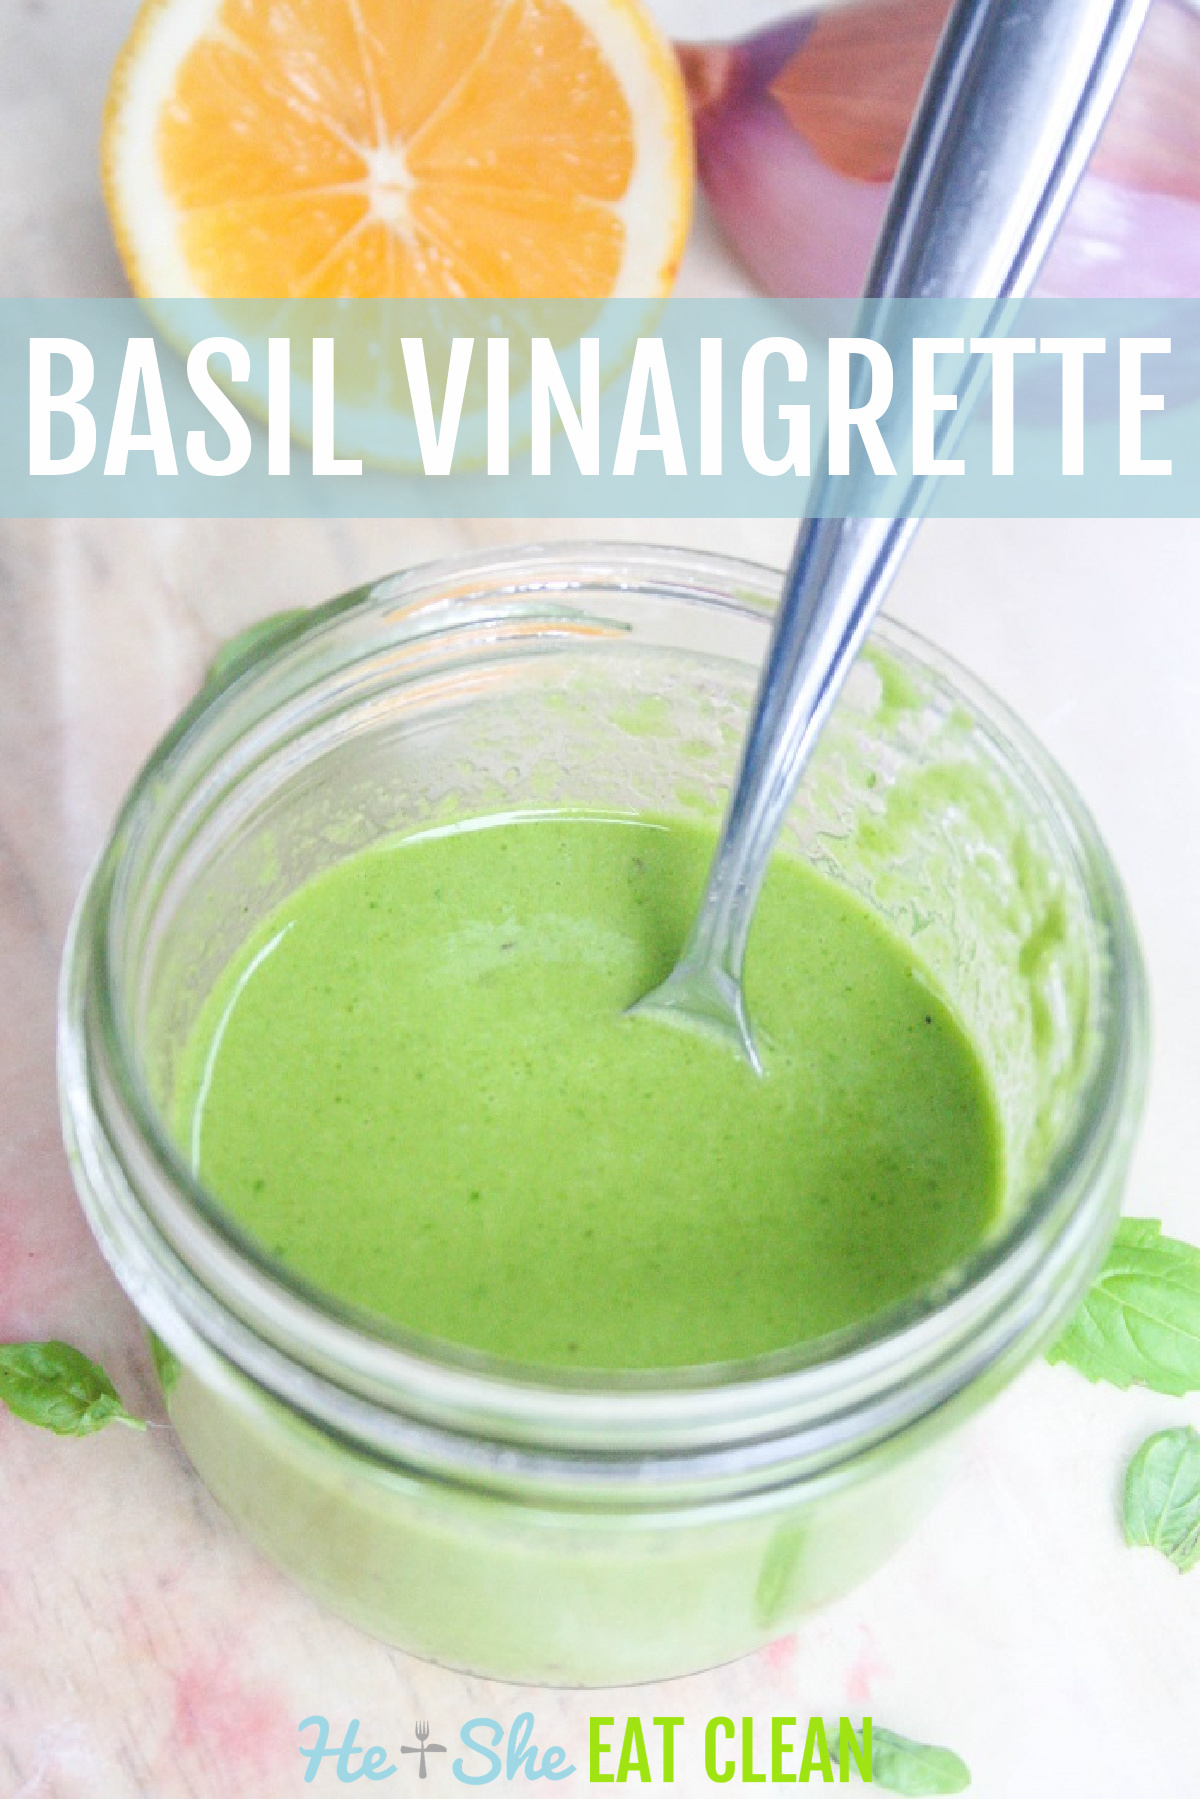 Basil Vinaigrette Dressing in a glass jar with a silver spoon